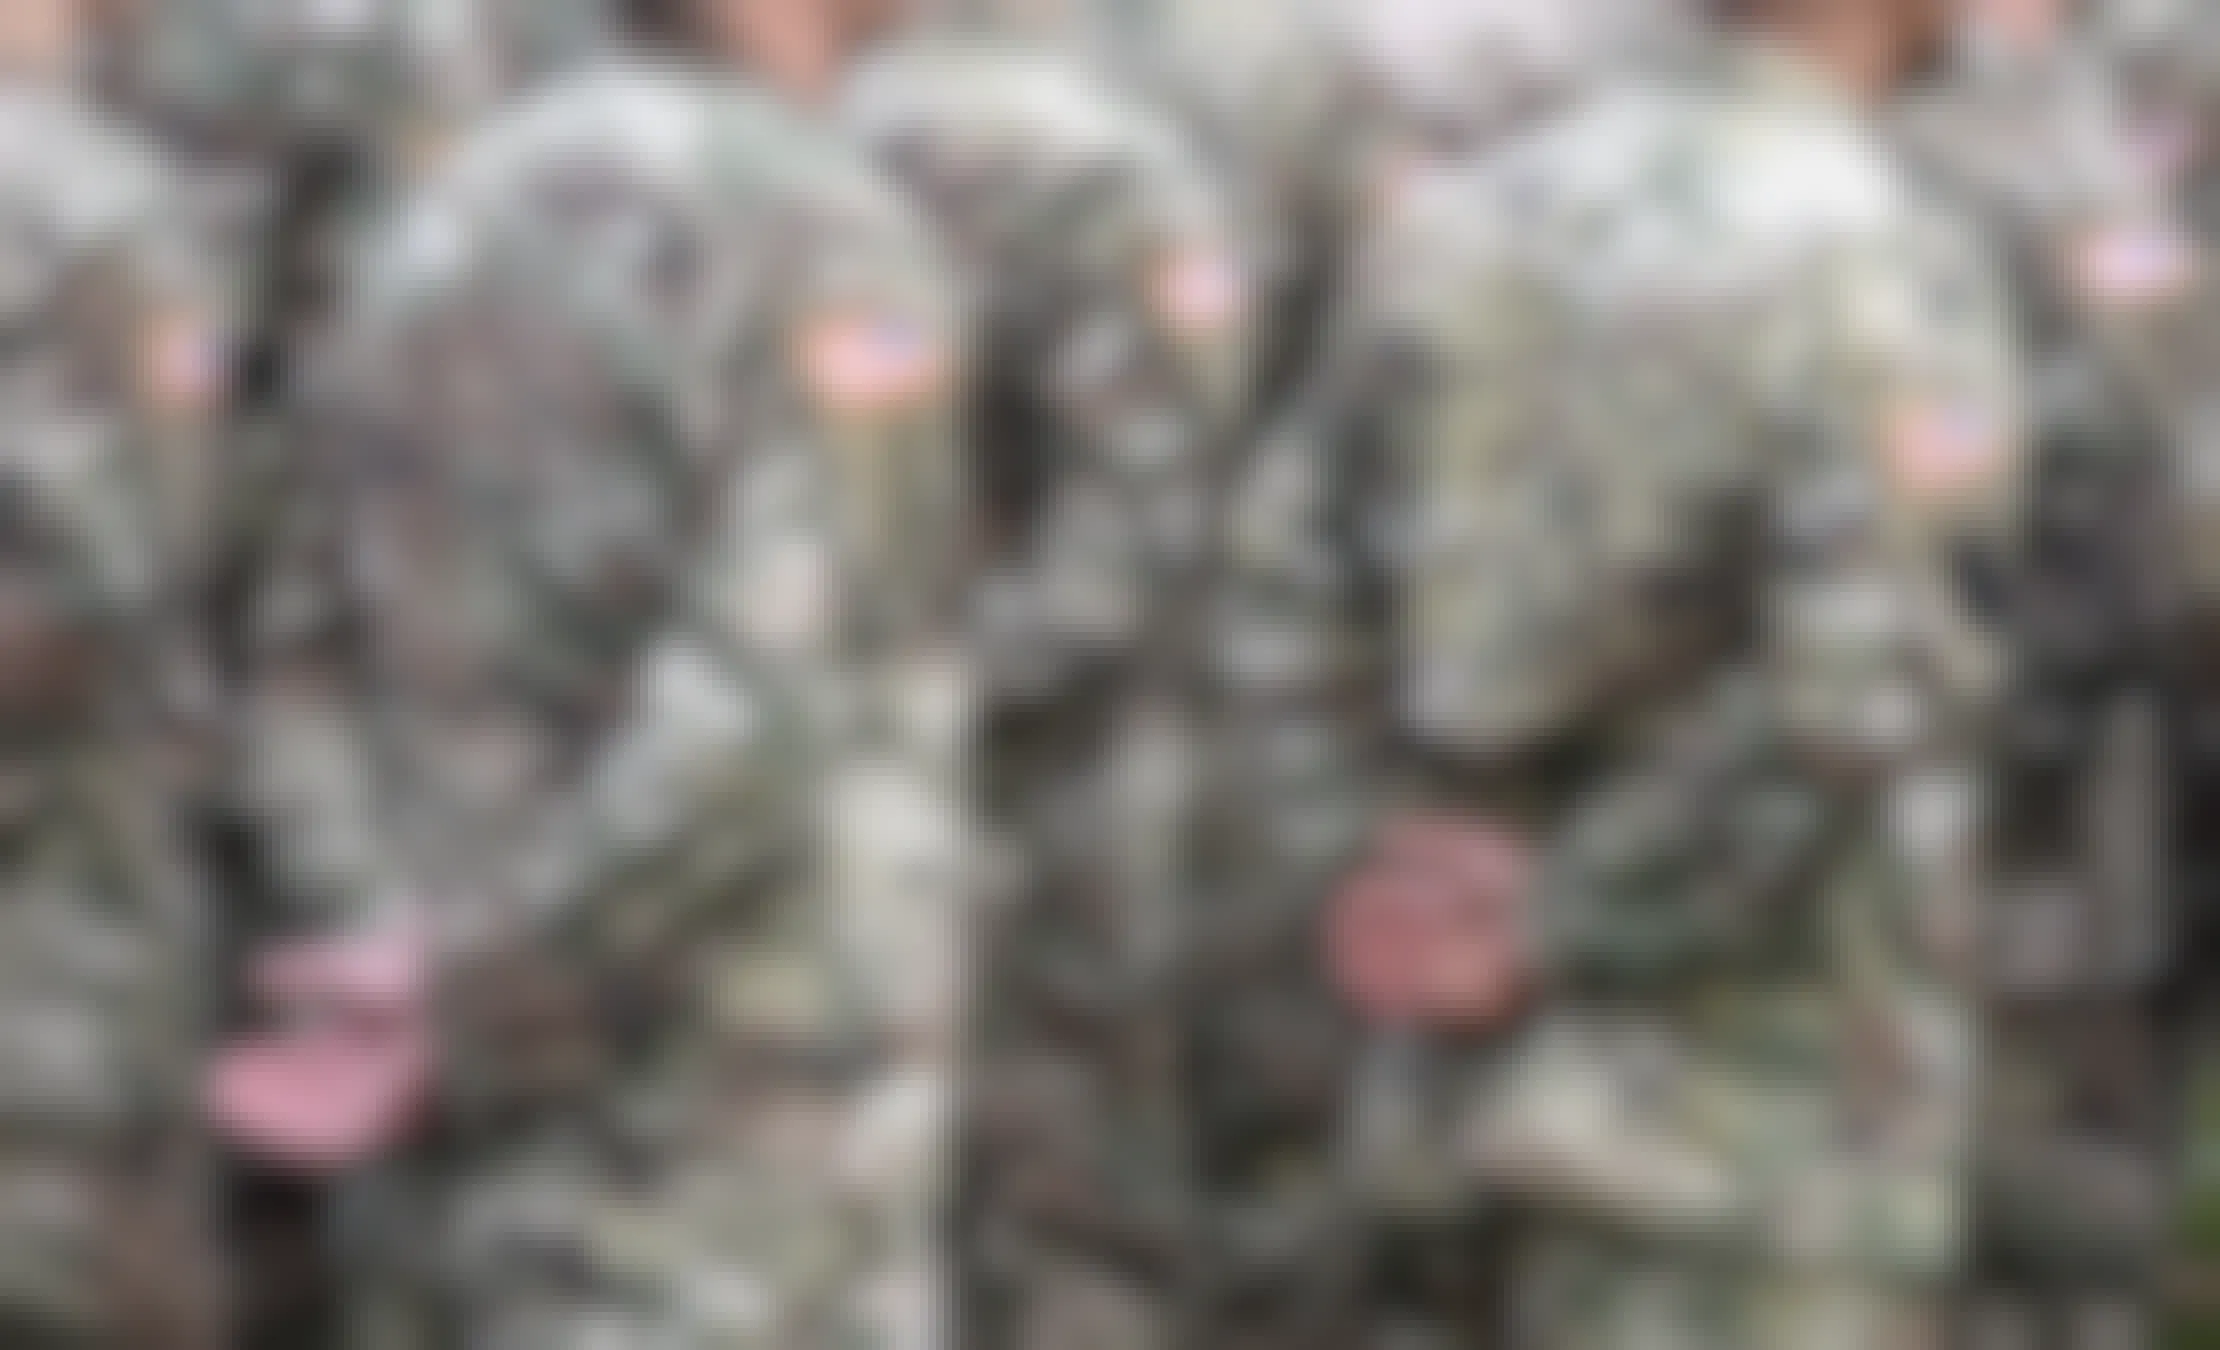 Military personnel in uniforms standing next to each other.